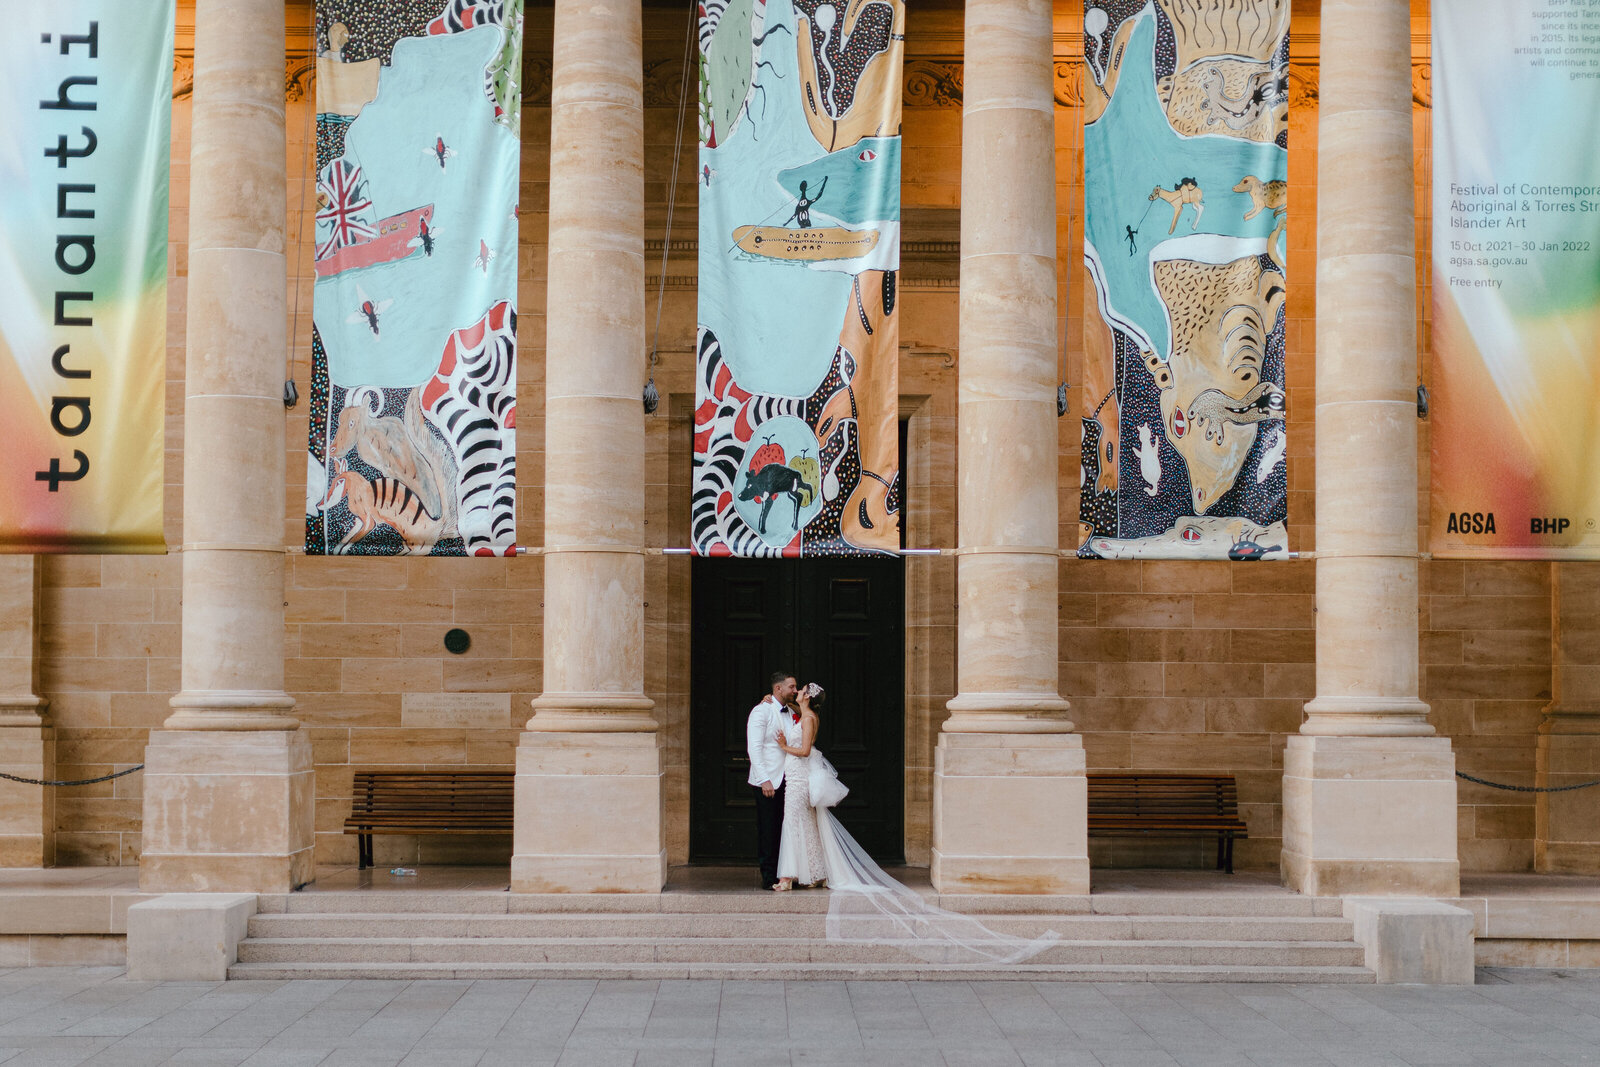 The façade of the Art Gallery of South Australia, tall limestone columns with a newlywed couple kissing in the centre.